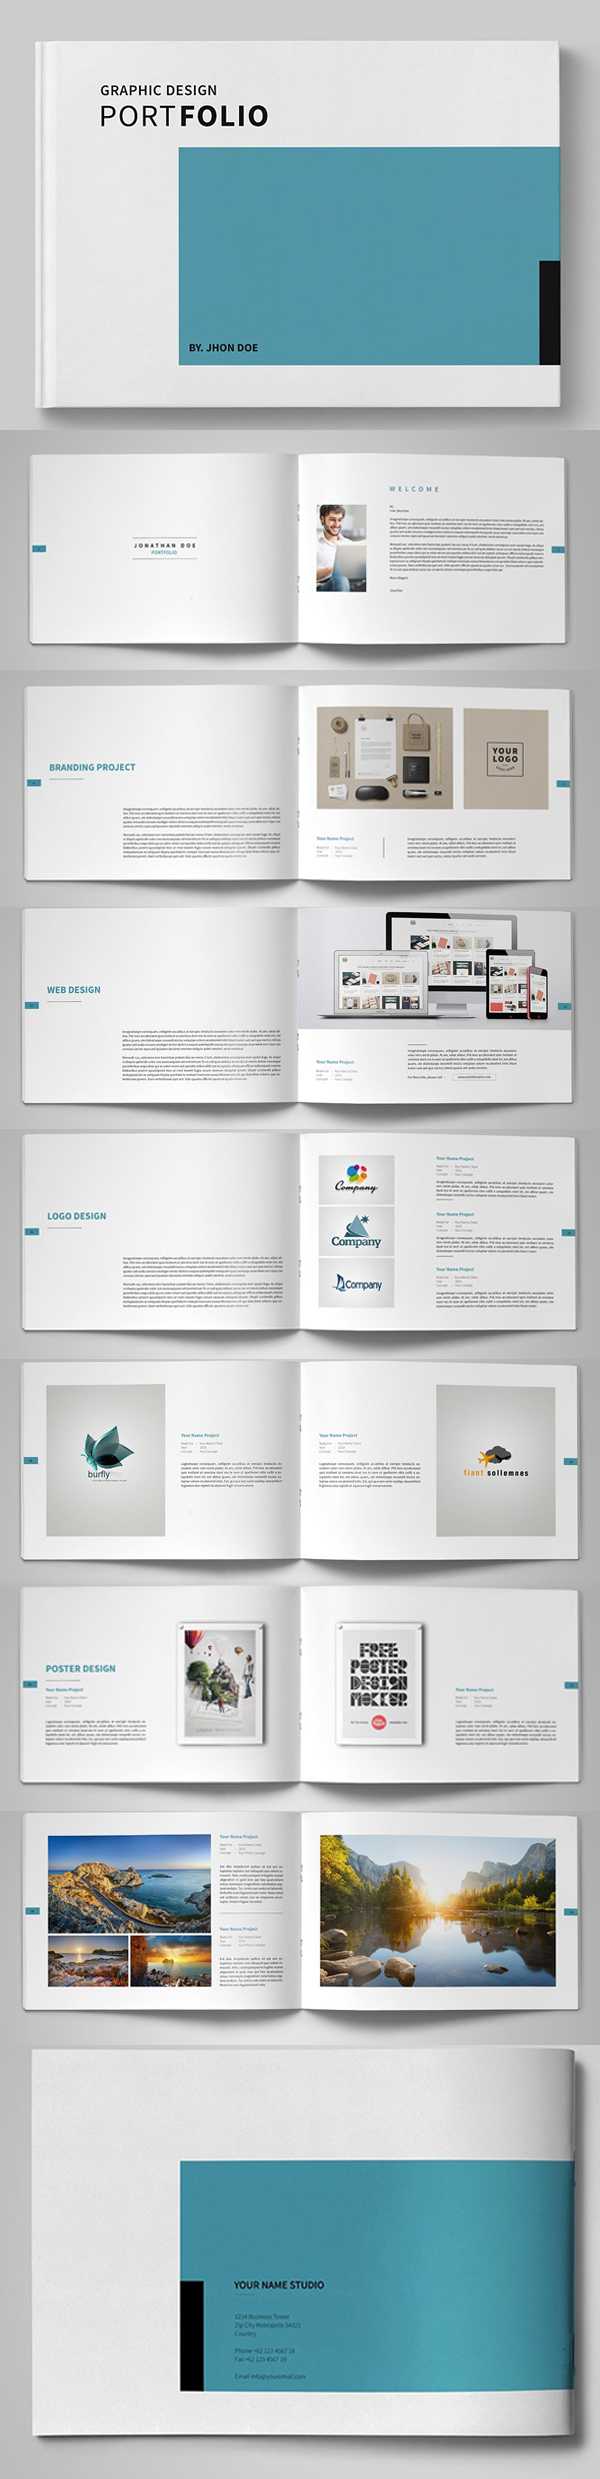 20 New Professional Catalog Brochure Templates | Design Intended For Online Brochure Template Free